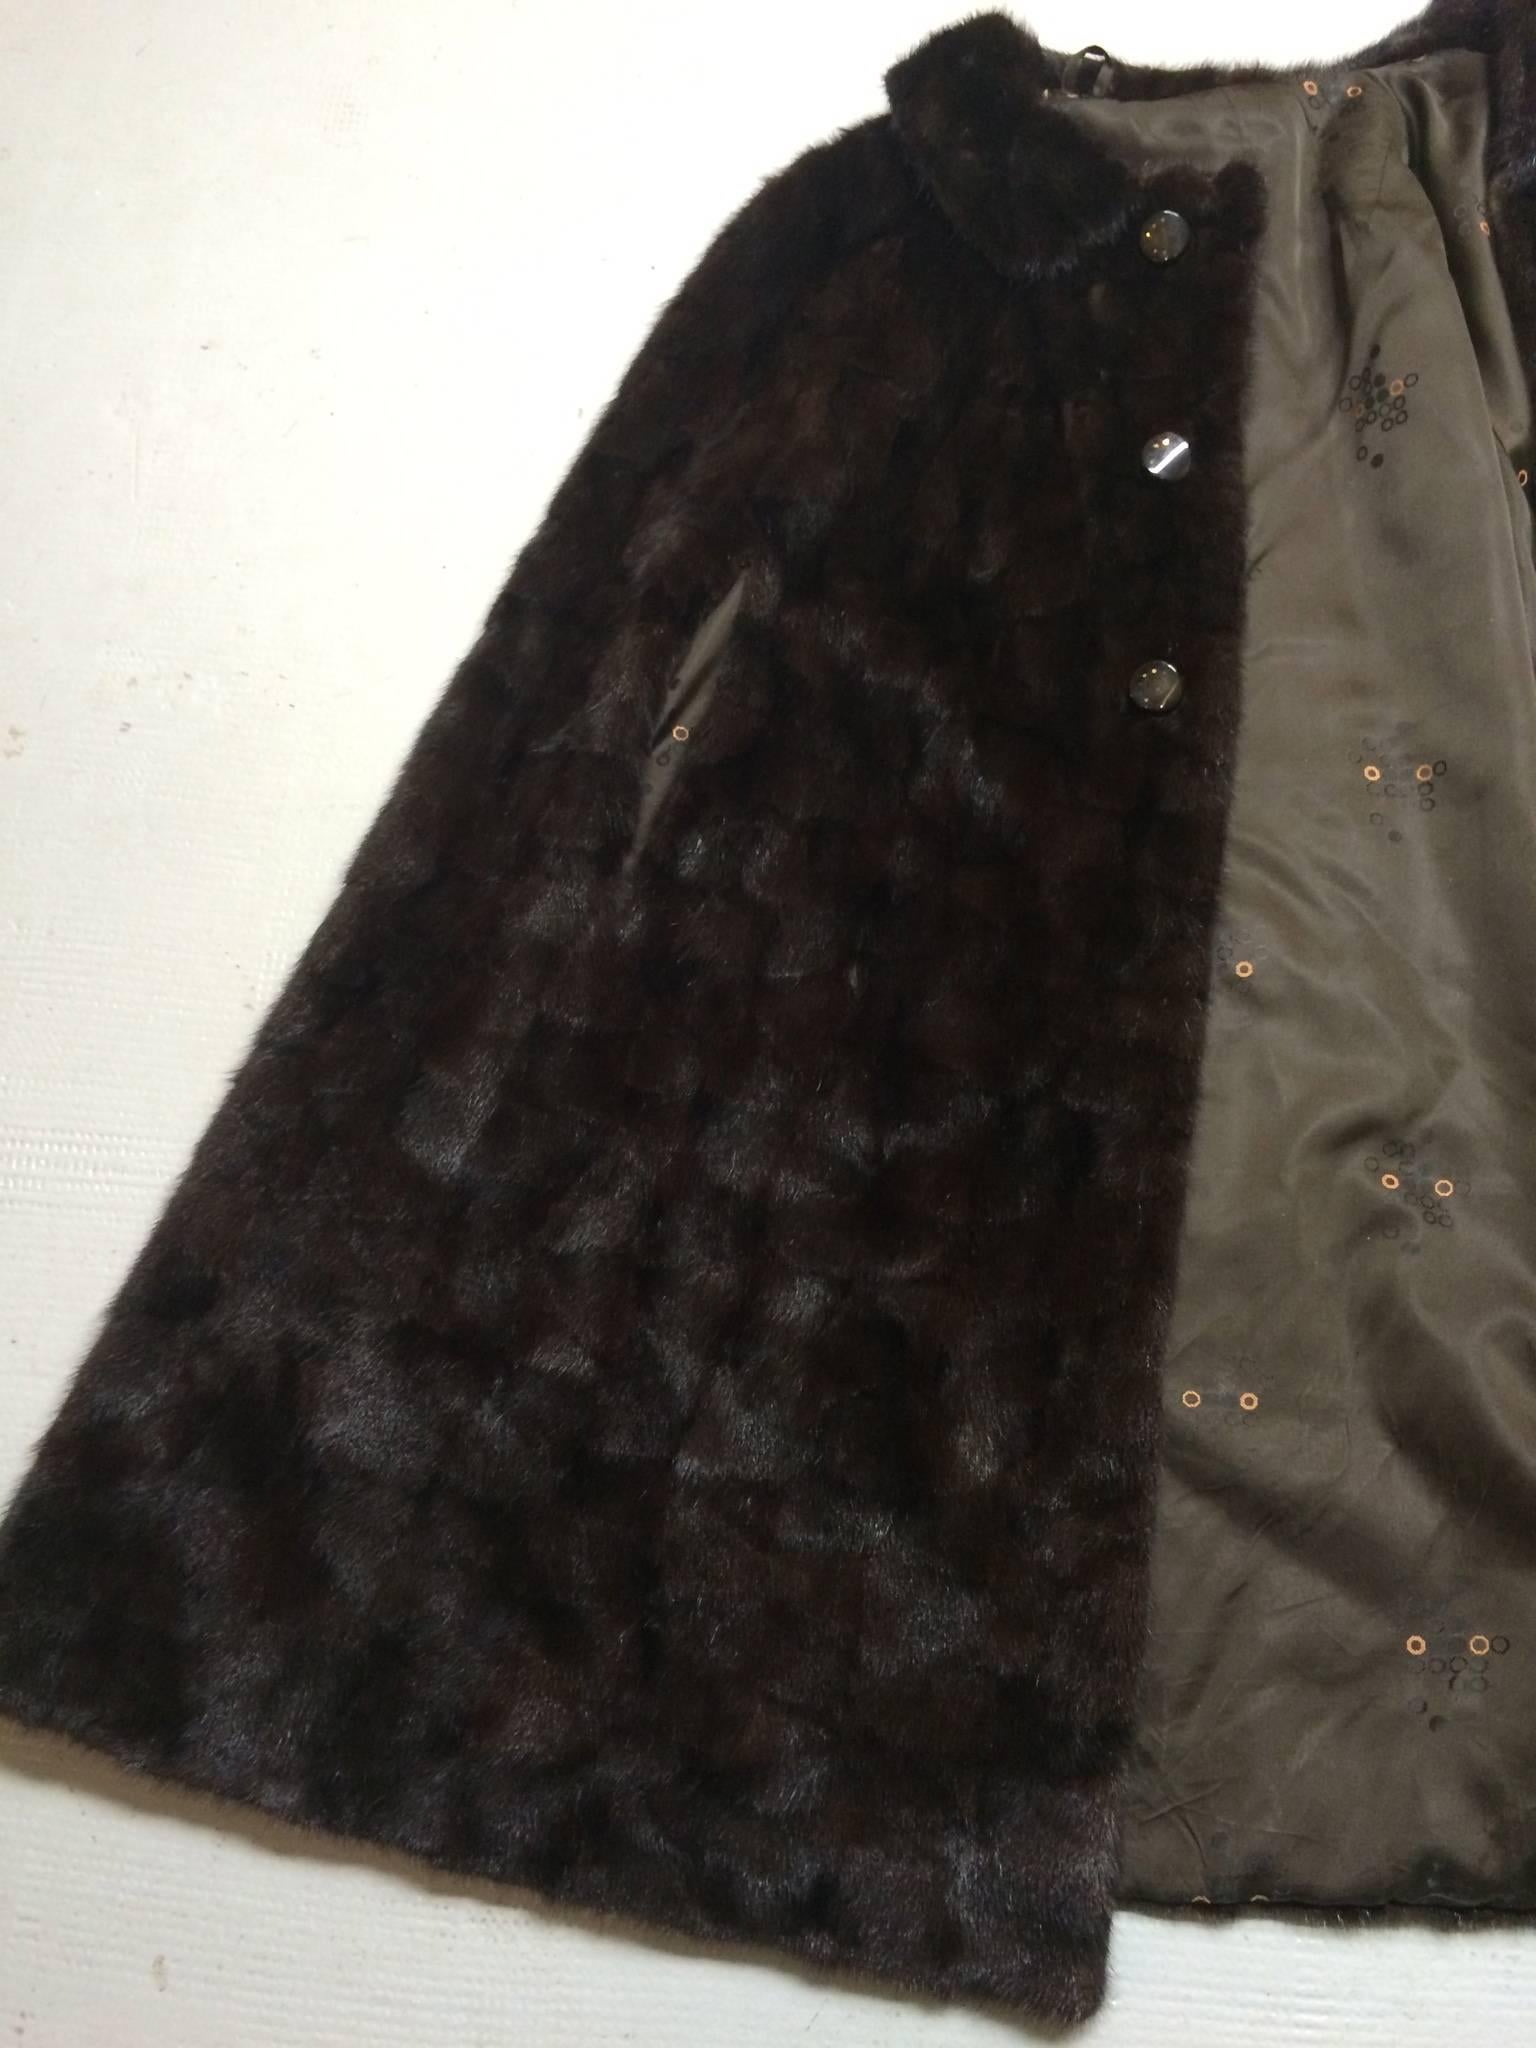 Timeless glamorous mink cape in beautiful shades of rich brown.
The heavy satin of the lining is adorned with a classical 50's floral design.
No damage on the lining.
43 inches long from back collar to hem (110cm).
Closes with invisible hooks